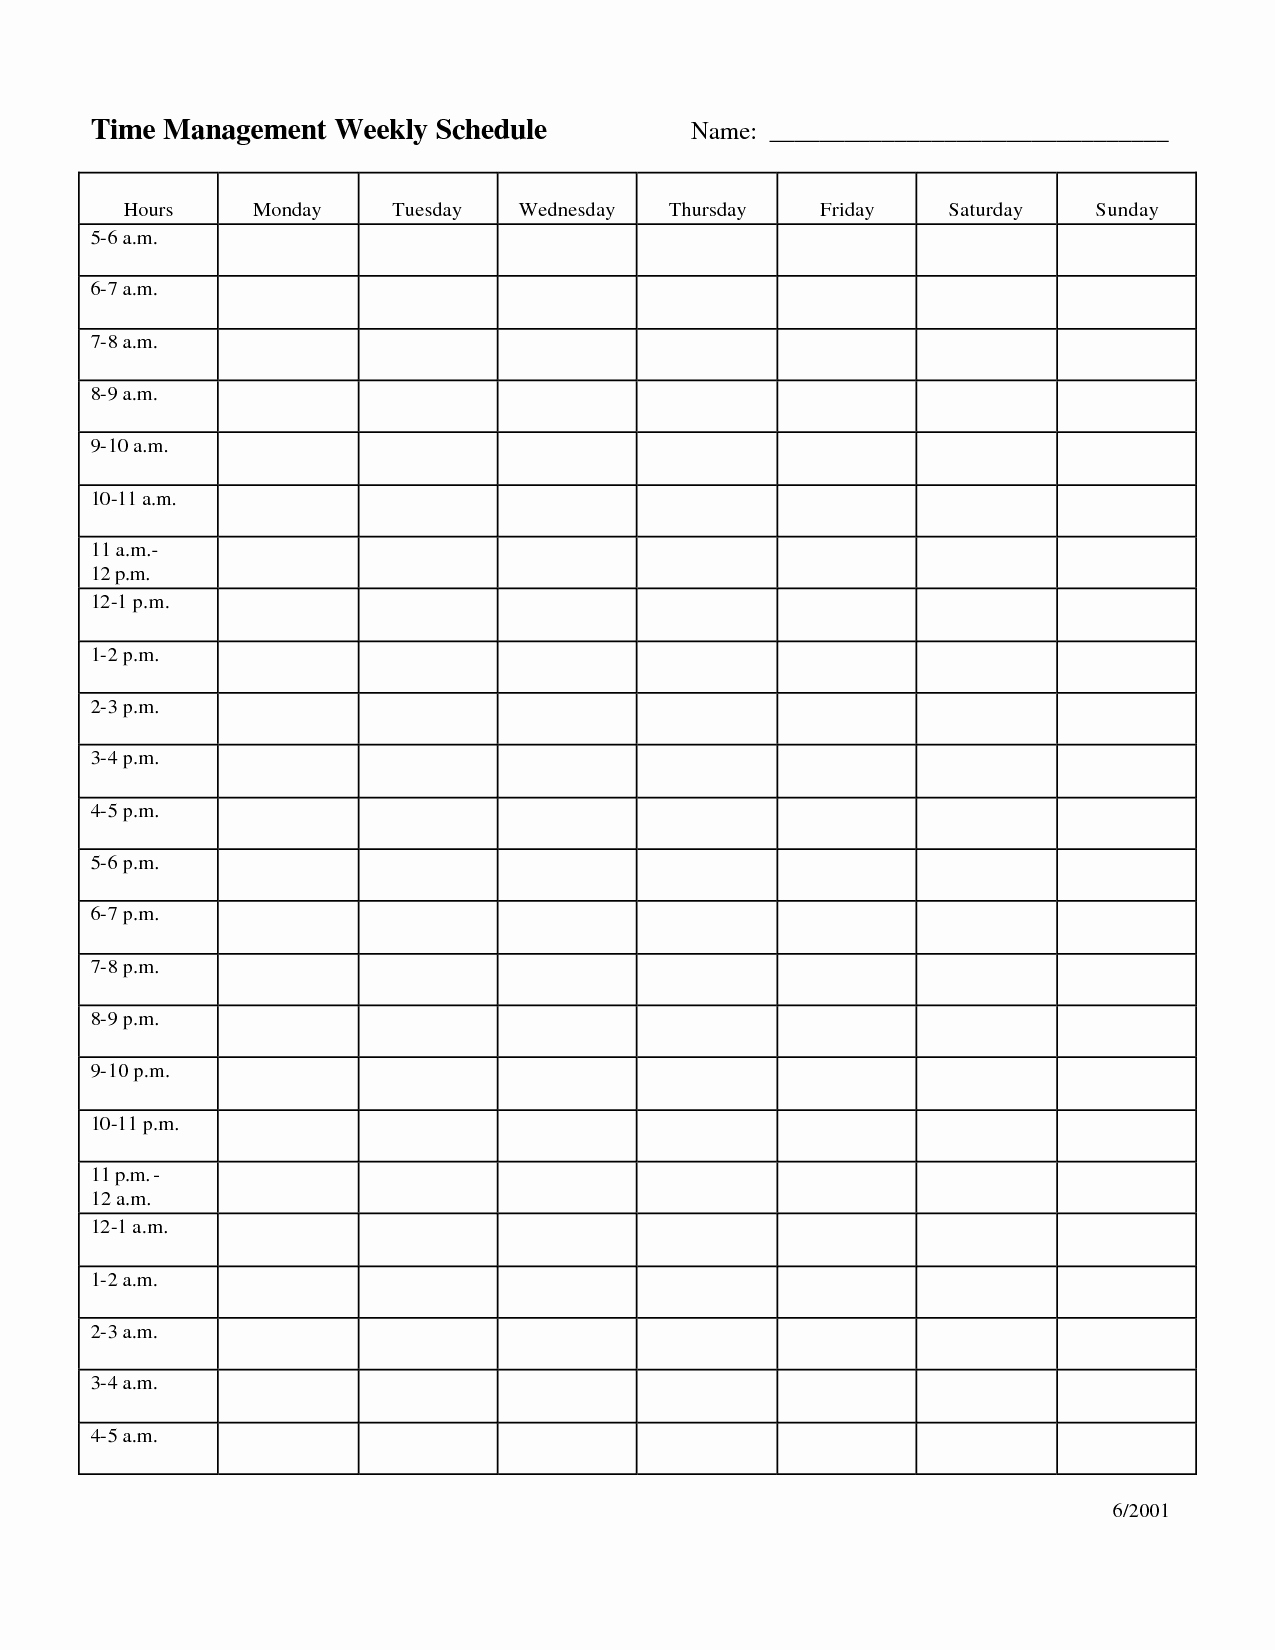 Weekly Schedule Template with Hours New Time Management Weekly Schedule Template …